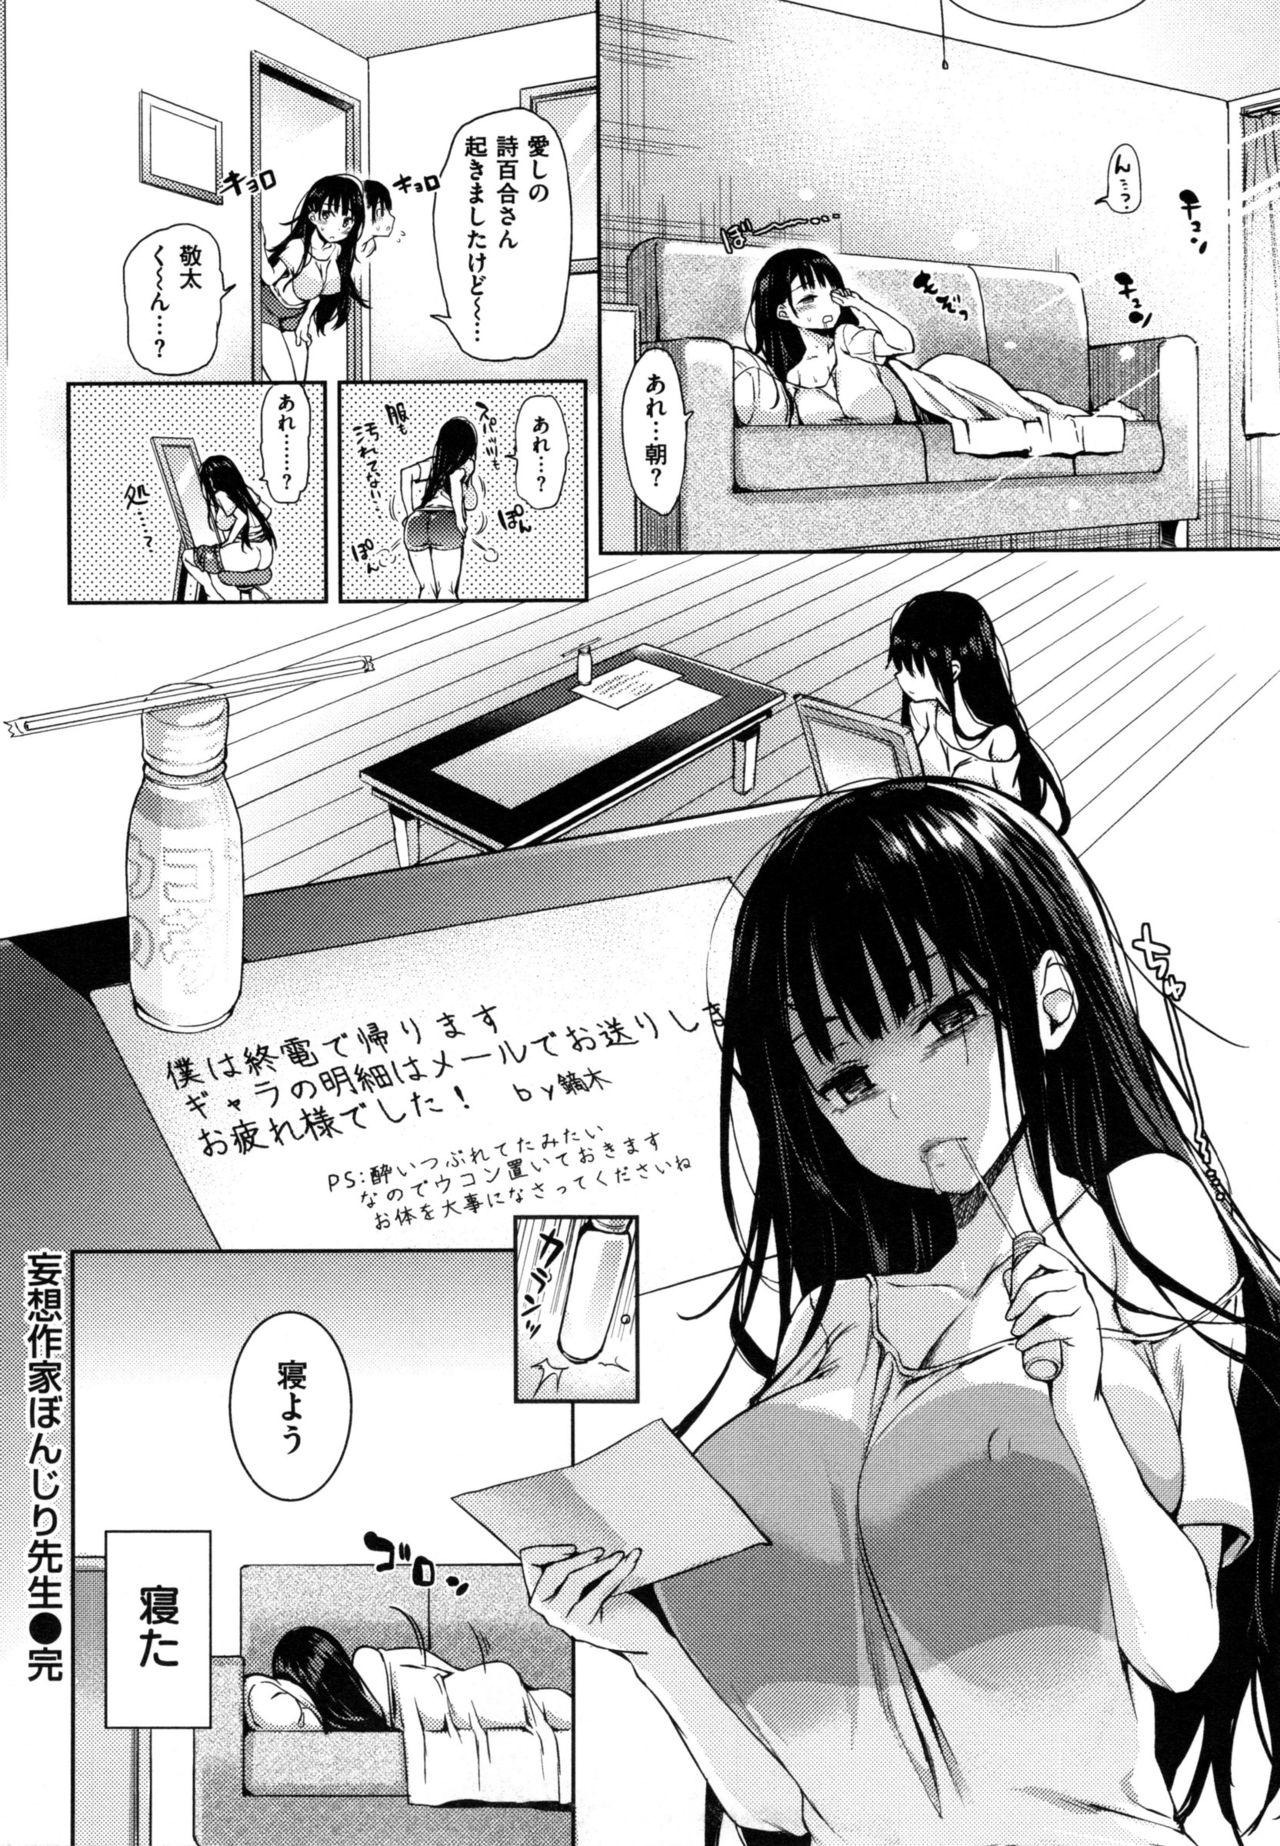 [Michiking] Shujuu Ecstasy - Sexual Relation of Master and Servant.  - page 31 full